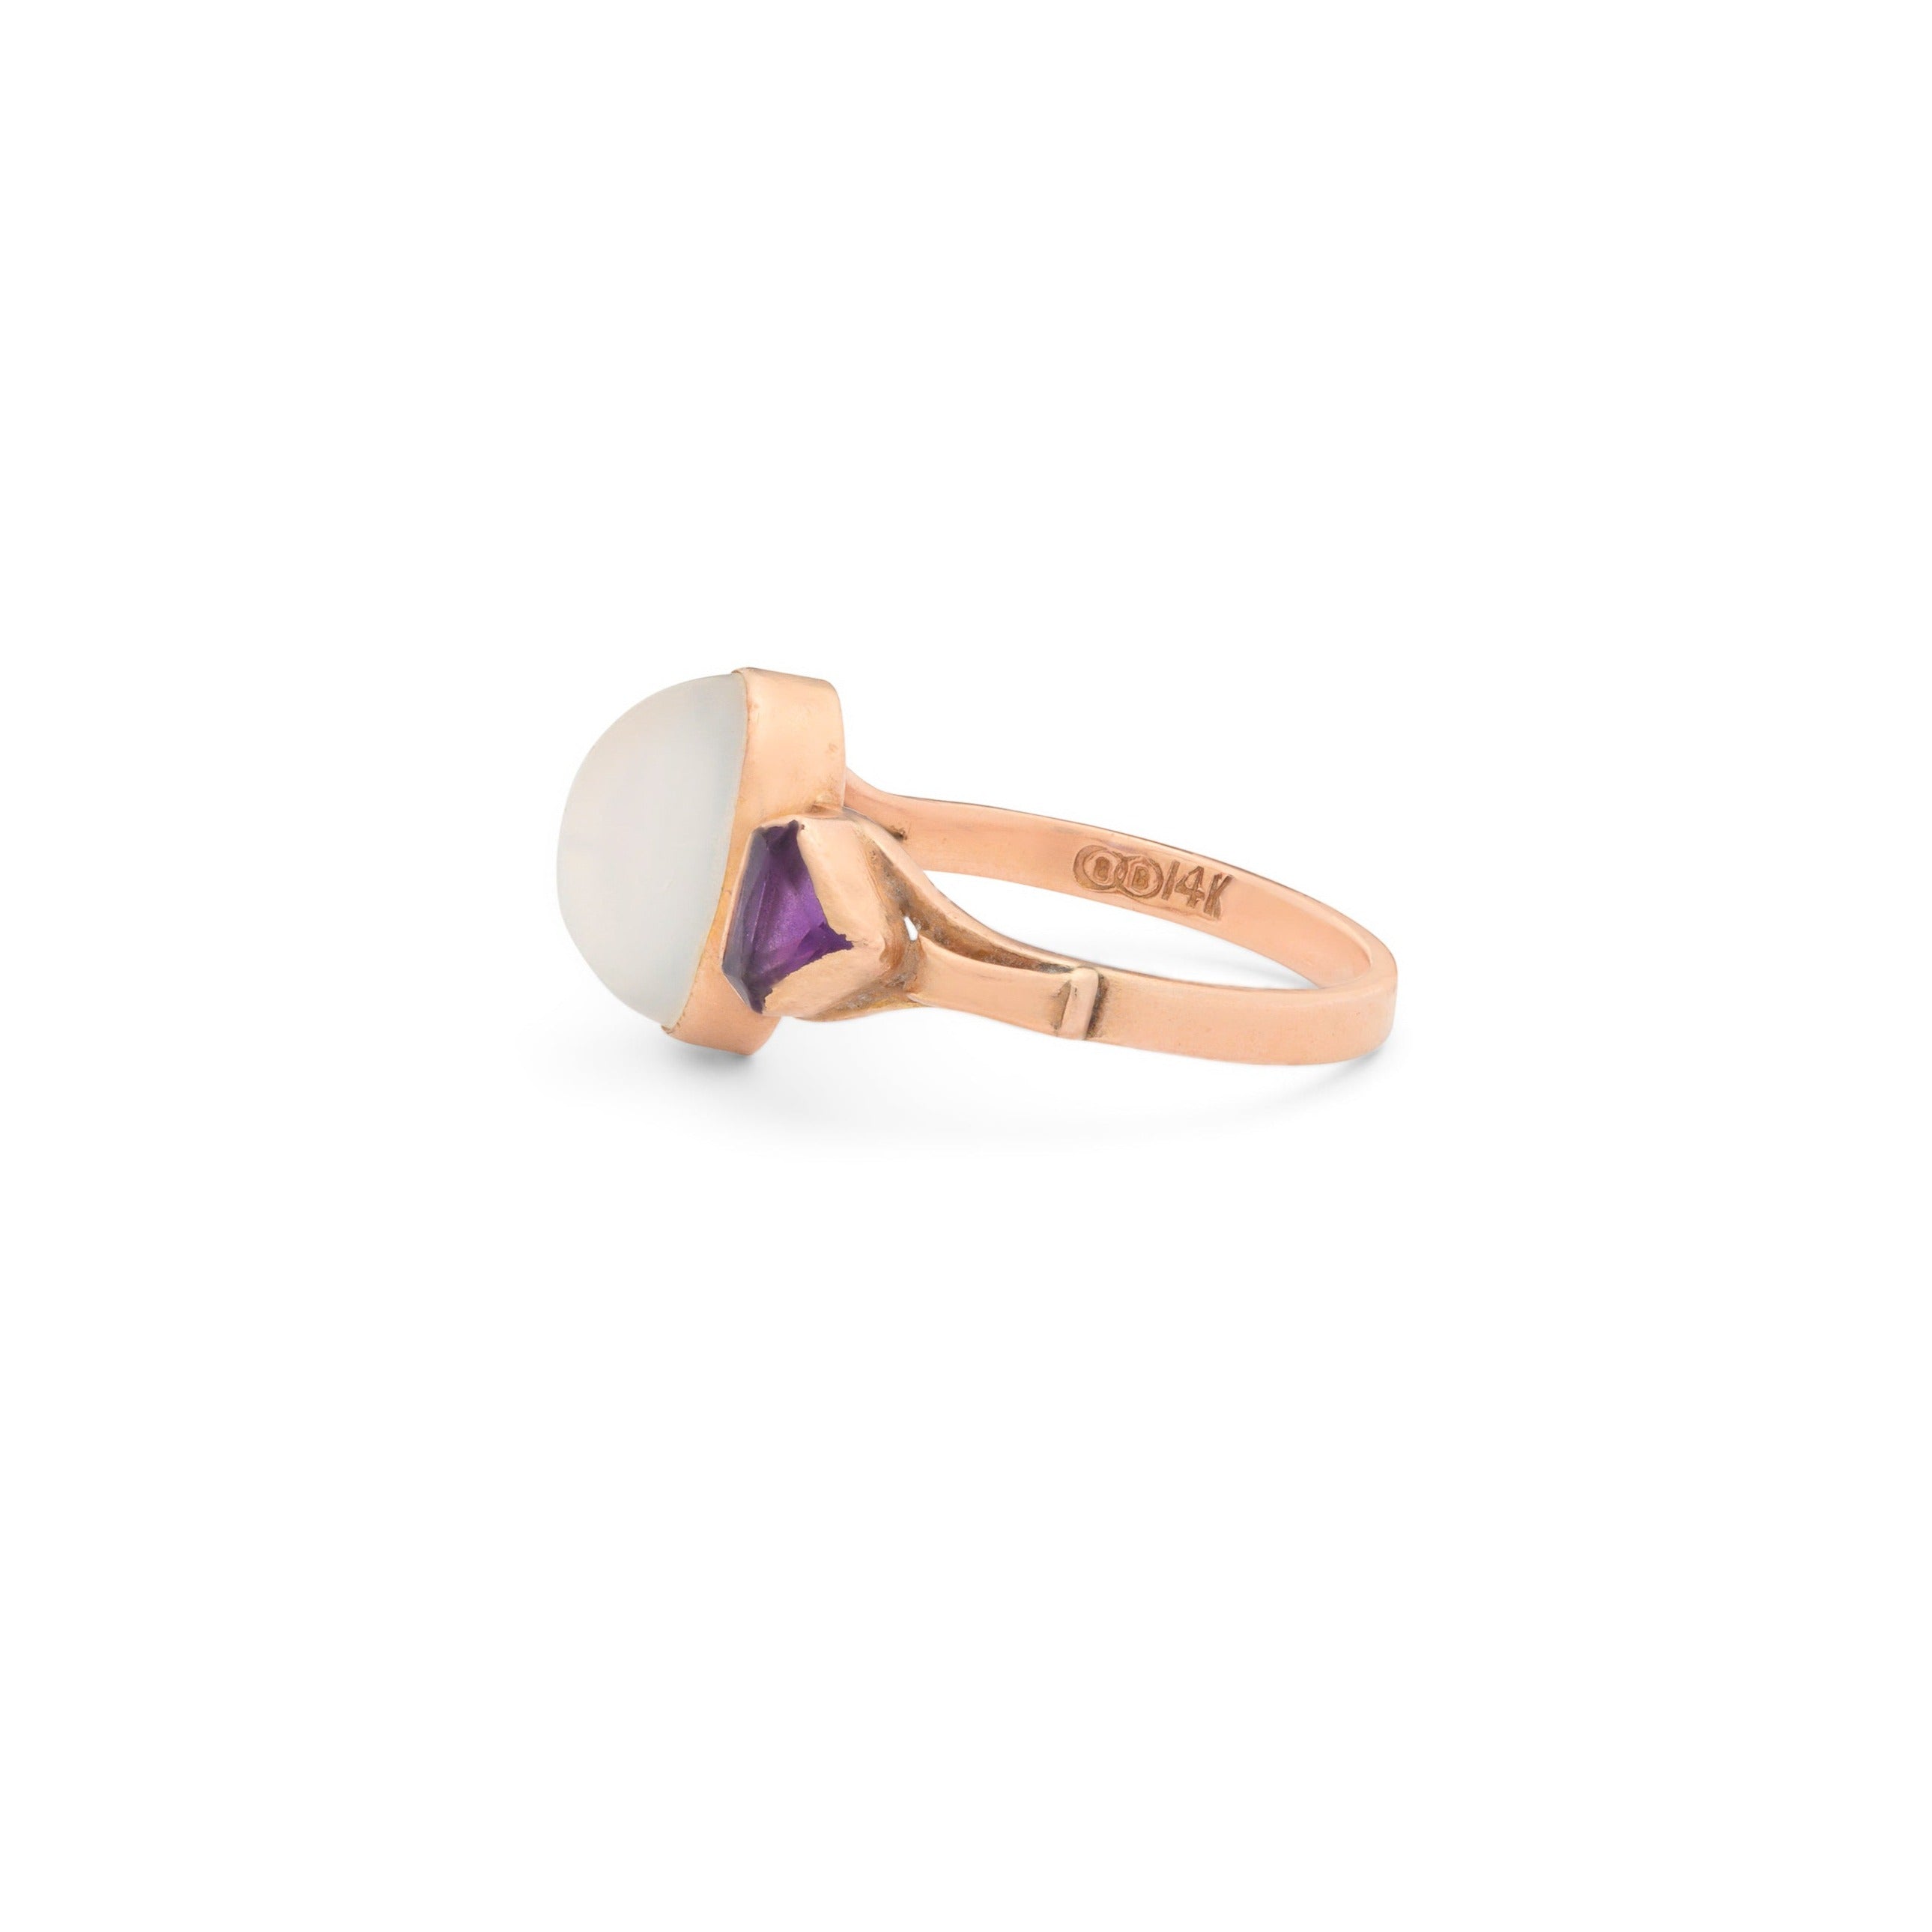 Moonstone, Amethyst, and 14k Rose Gold Ring